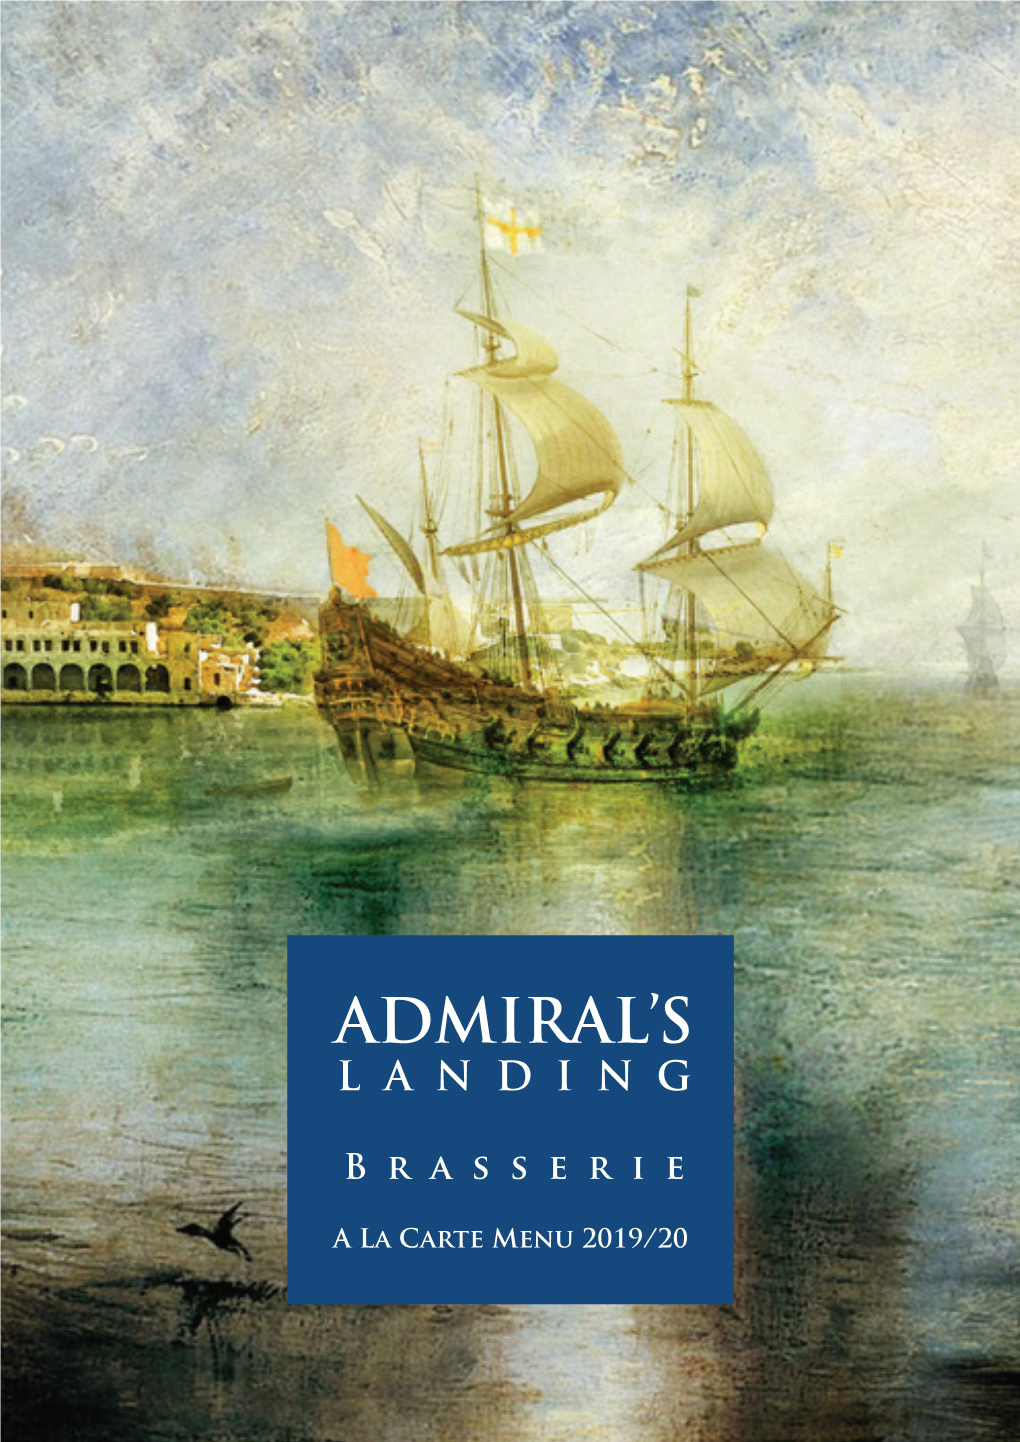 A La Carte Menu 2019/20 It Is a Pleasure to Welcome You to the Admiral’S Landing Brasserie